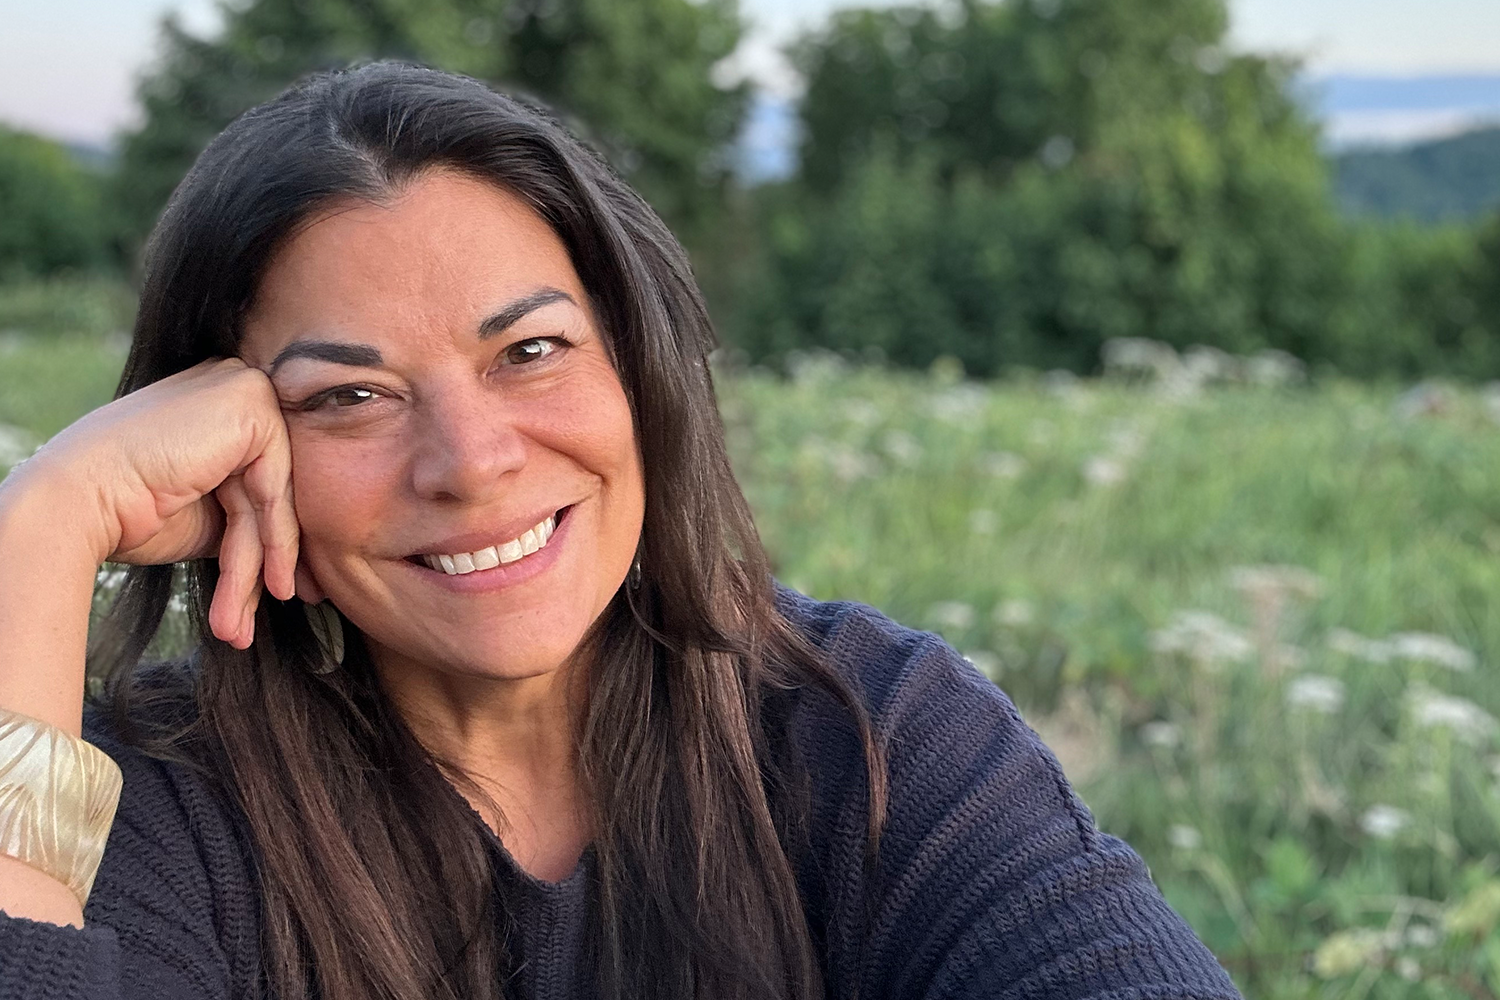 Patrice Mousseau, founder of Satya Organics, smiling in a grassy field